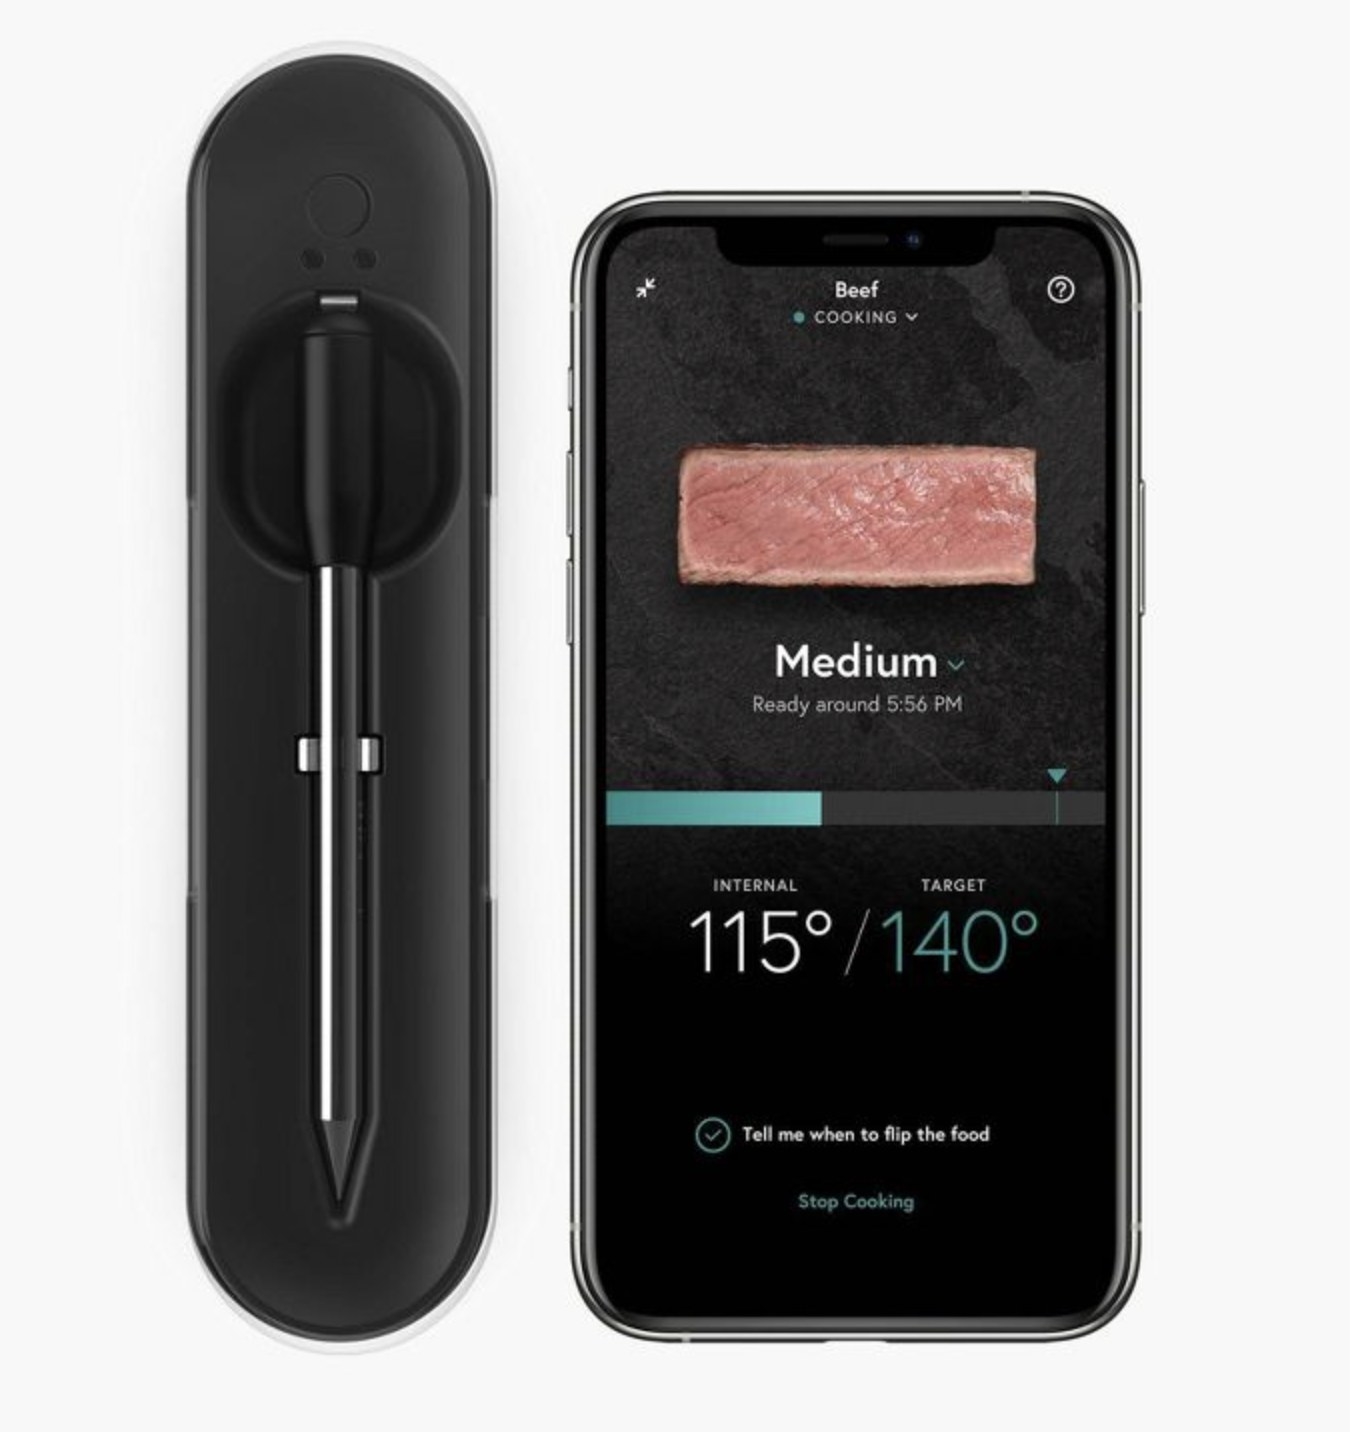 yummly smart meat thermometer next to accompanying app on a cell phone